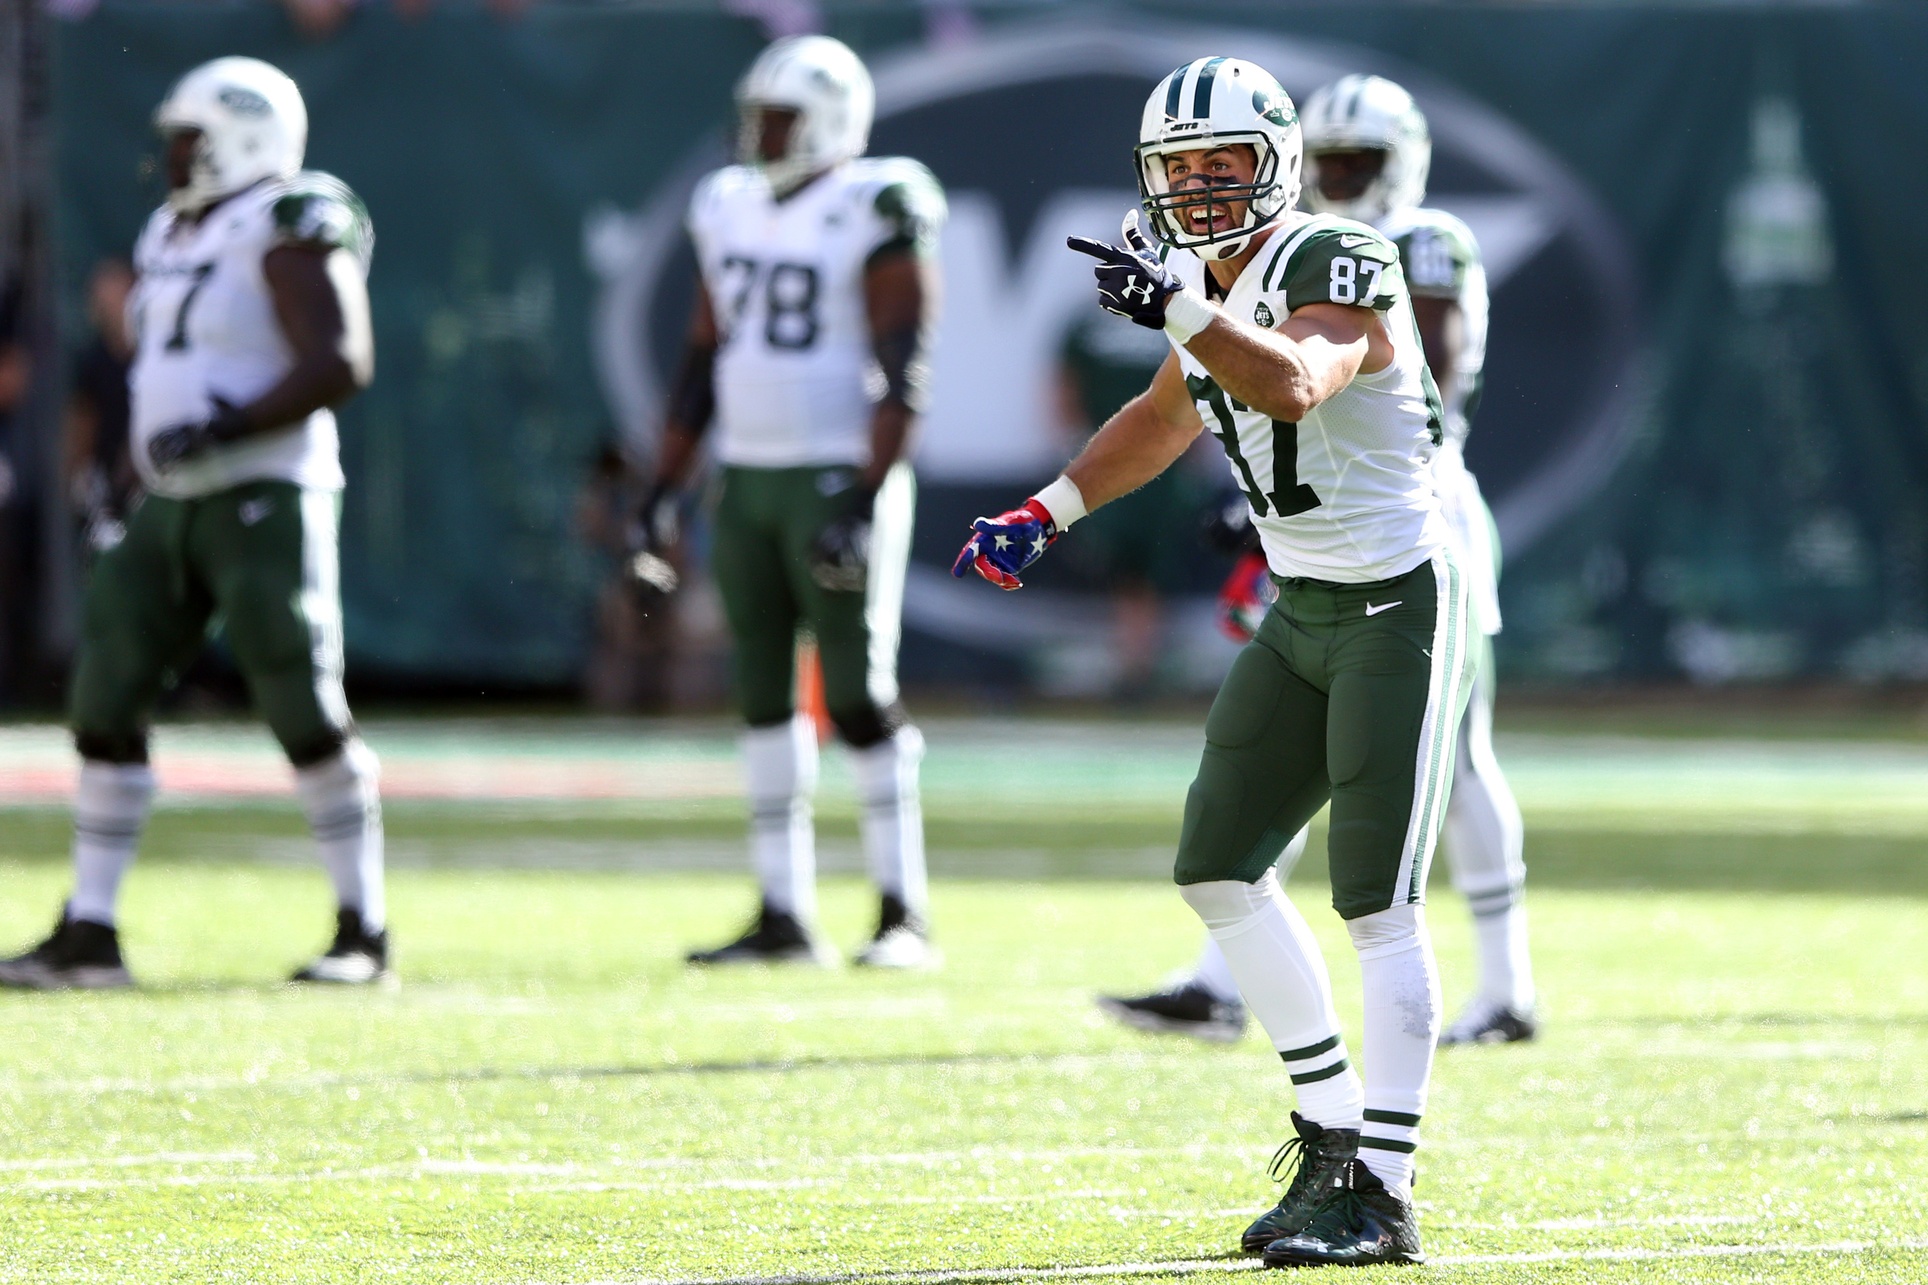 New York Jets: Eric Decker Placed On IR, Will Likely Miss Remainder Of Season 